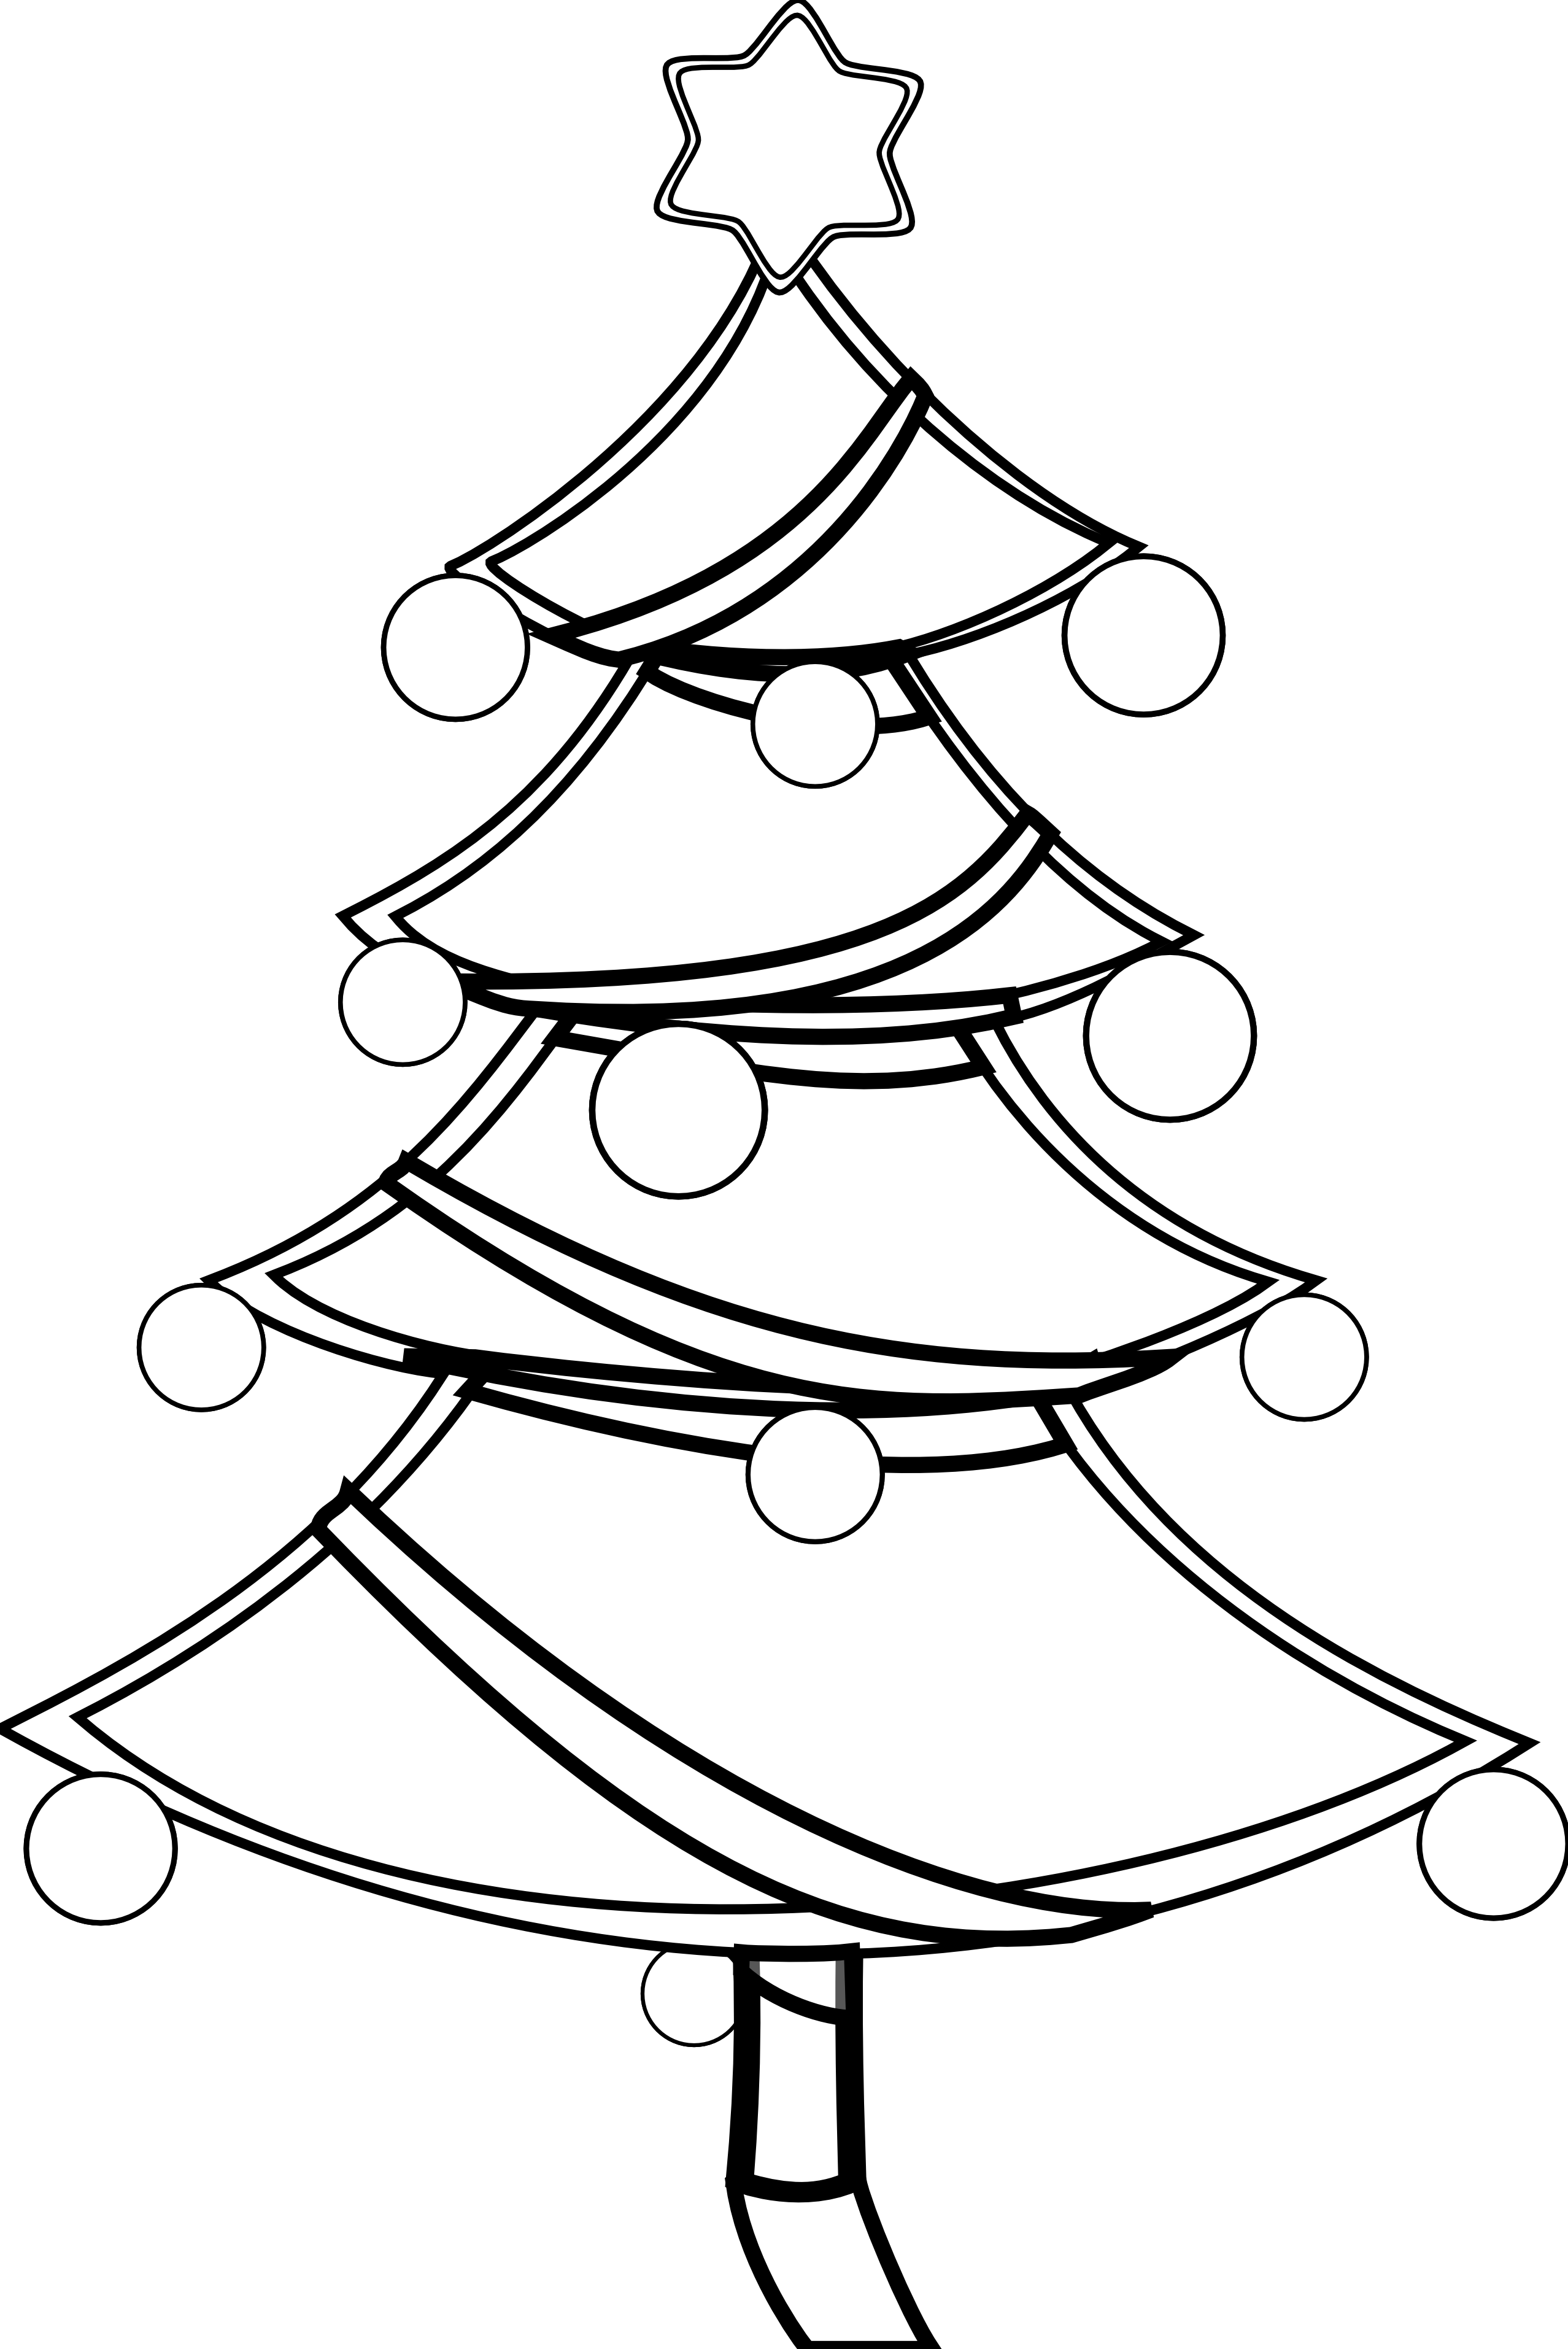 Xmas Stuff For > Christmas Candles Clip Art Black And White